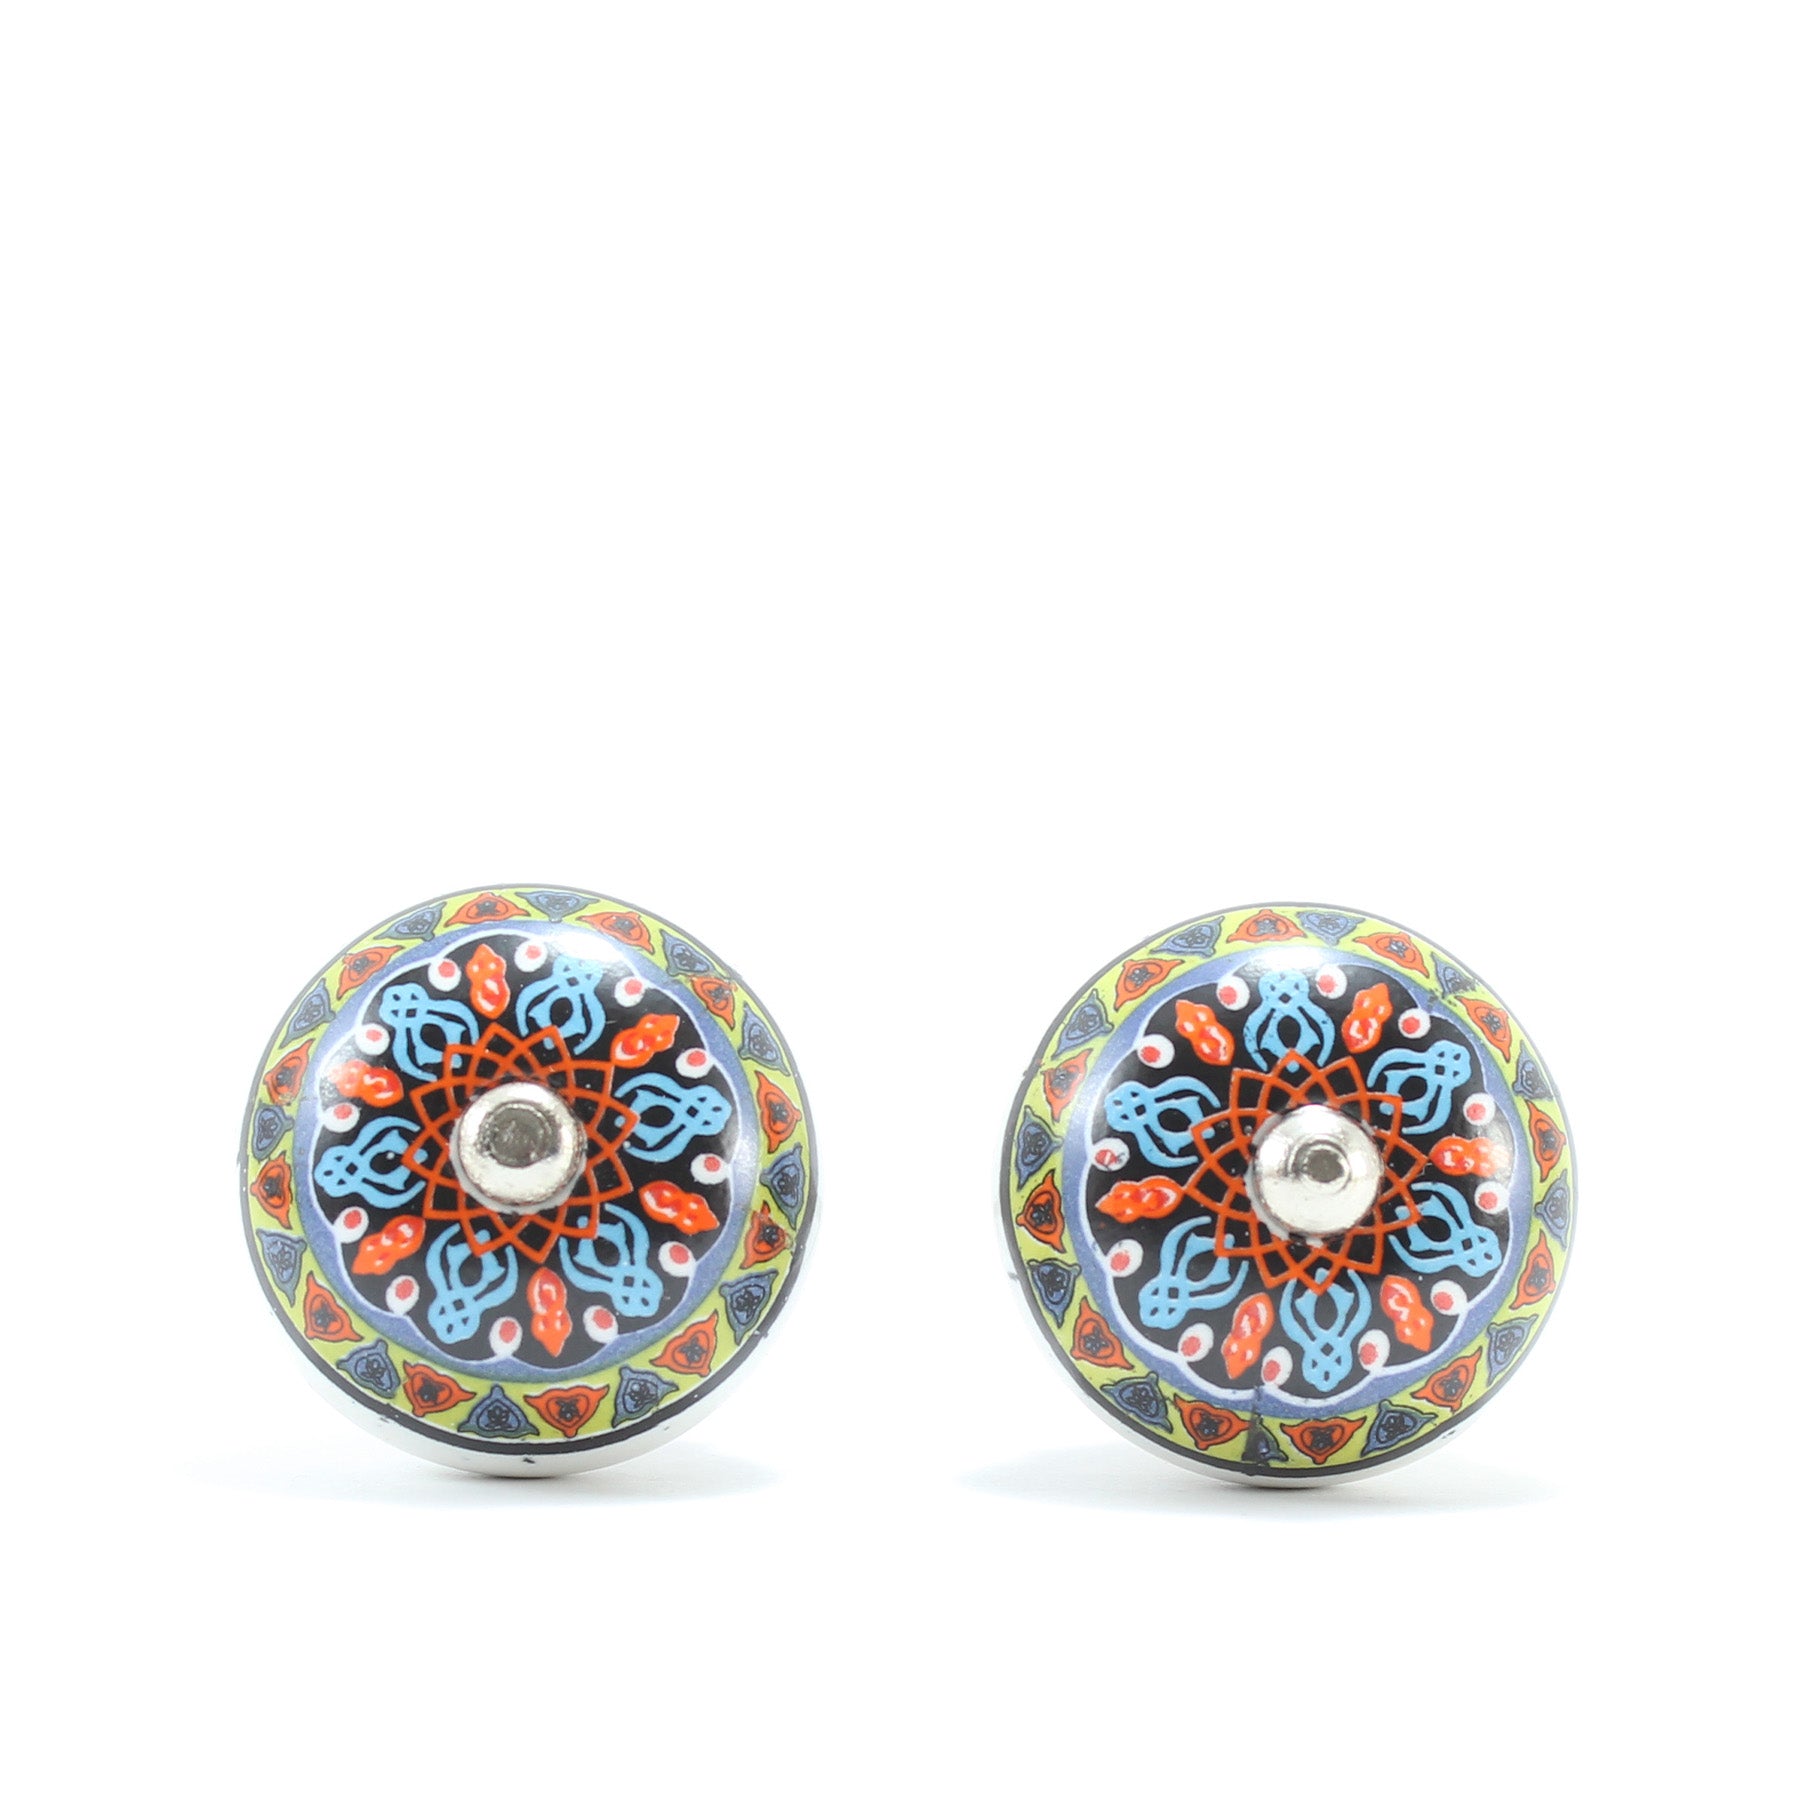 Handcrafted Ceramic Knobs XIII